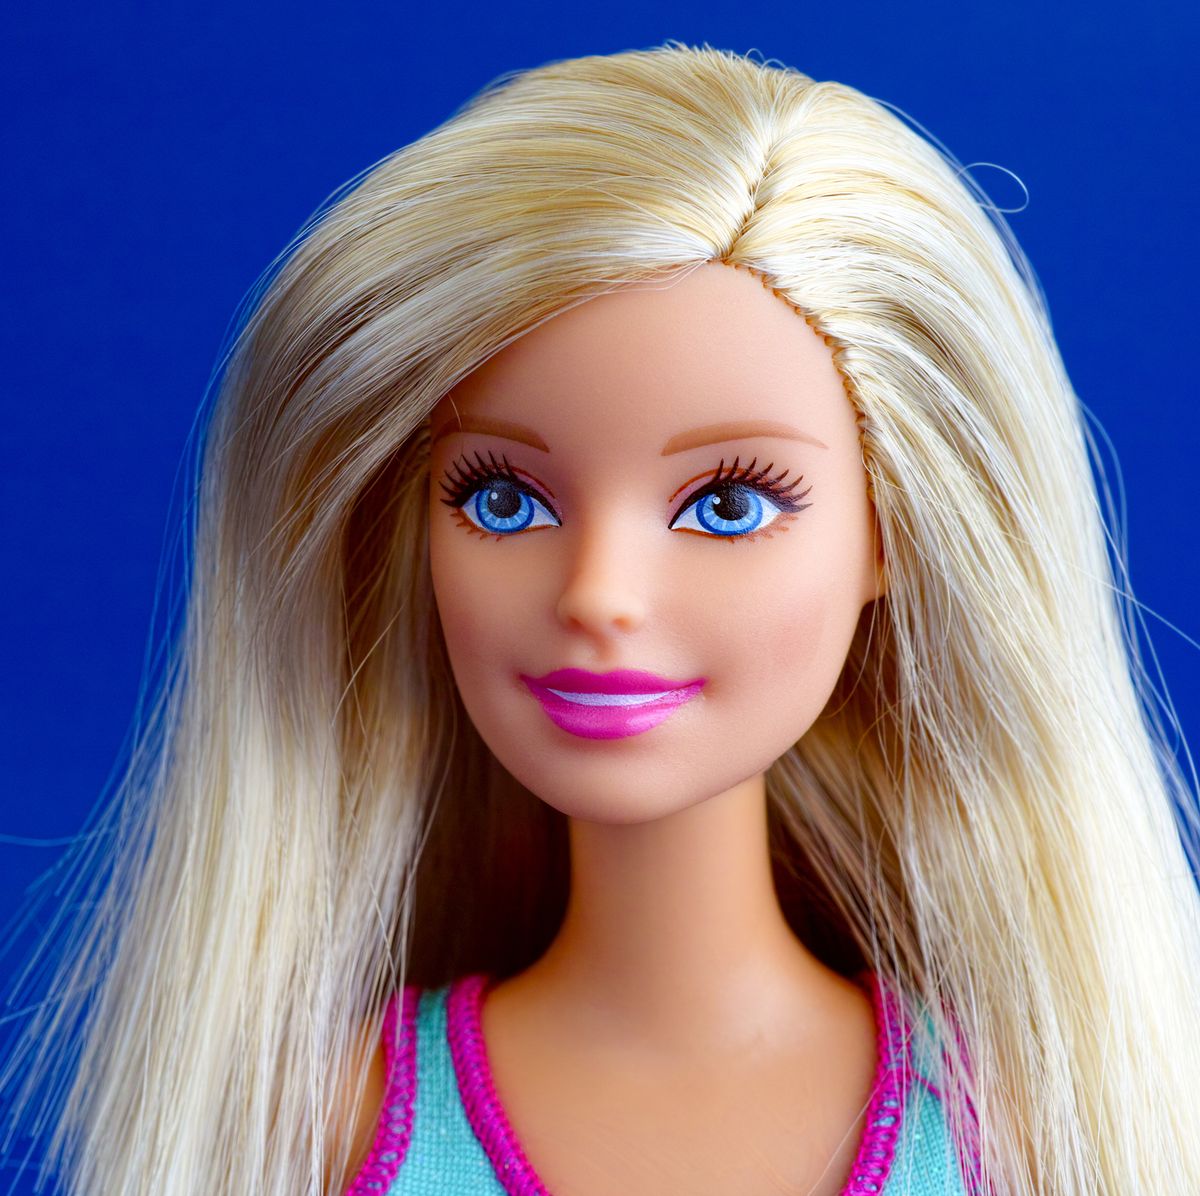 40 Barbie Doll Facts - History and Trivia About Barbies